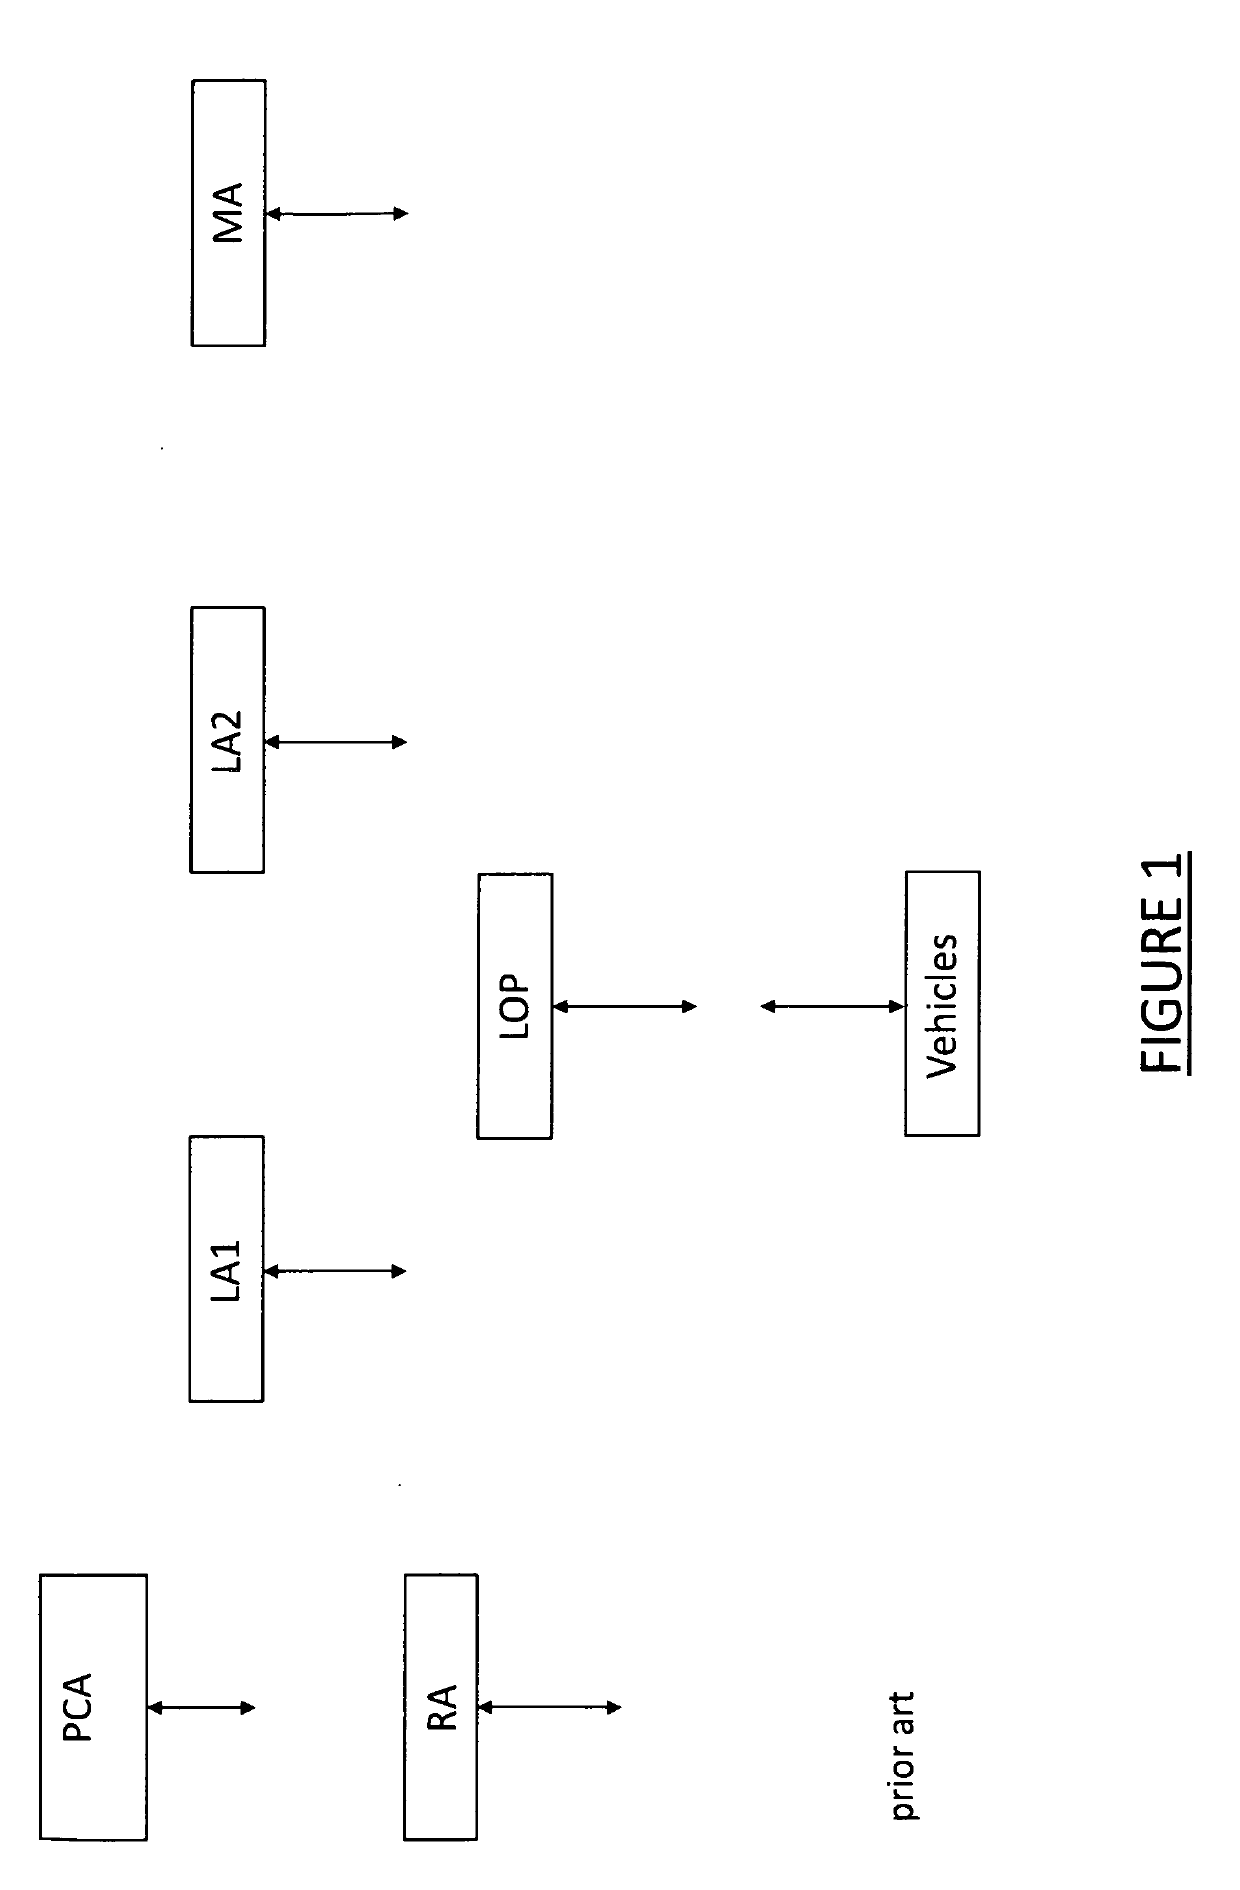 Method and system for secure connected vehicle communication